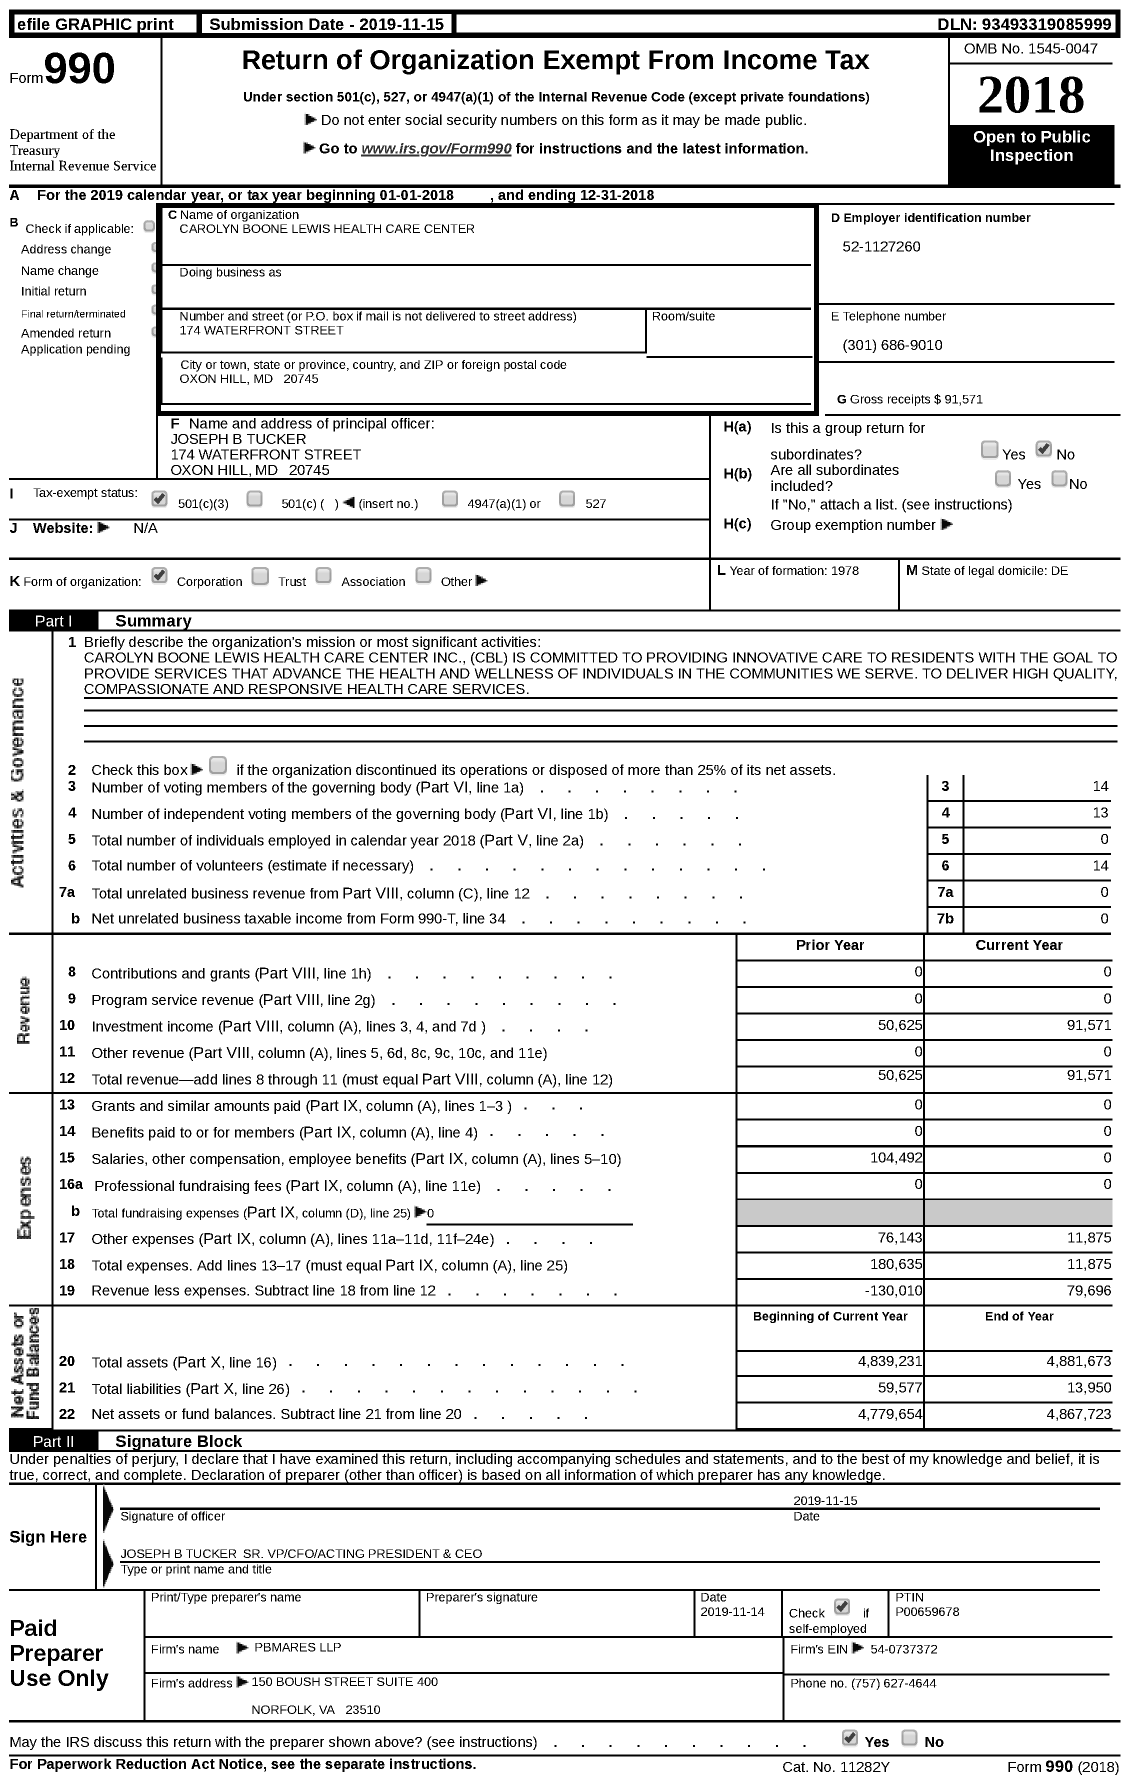 Image of first page of 2018 Form 990 for Carolyn Boone Lewis Health Care Center (CBL)